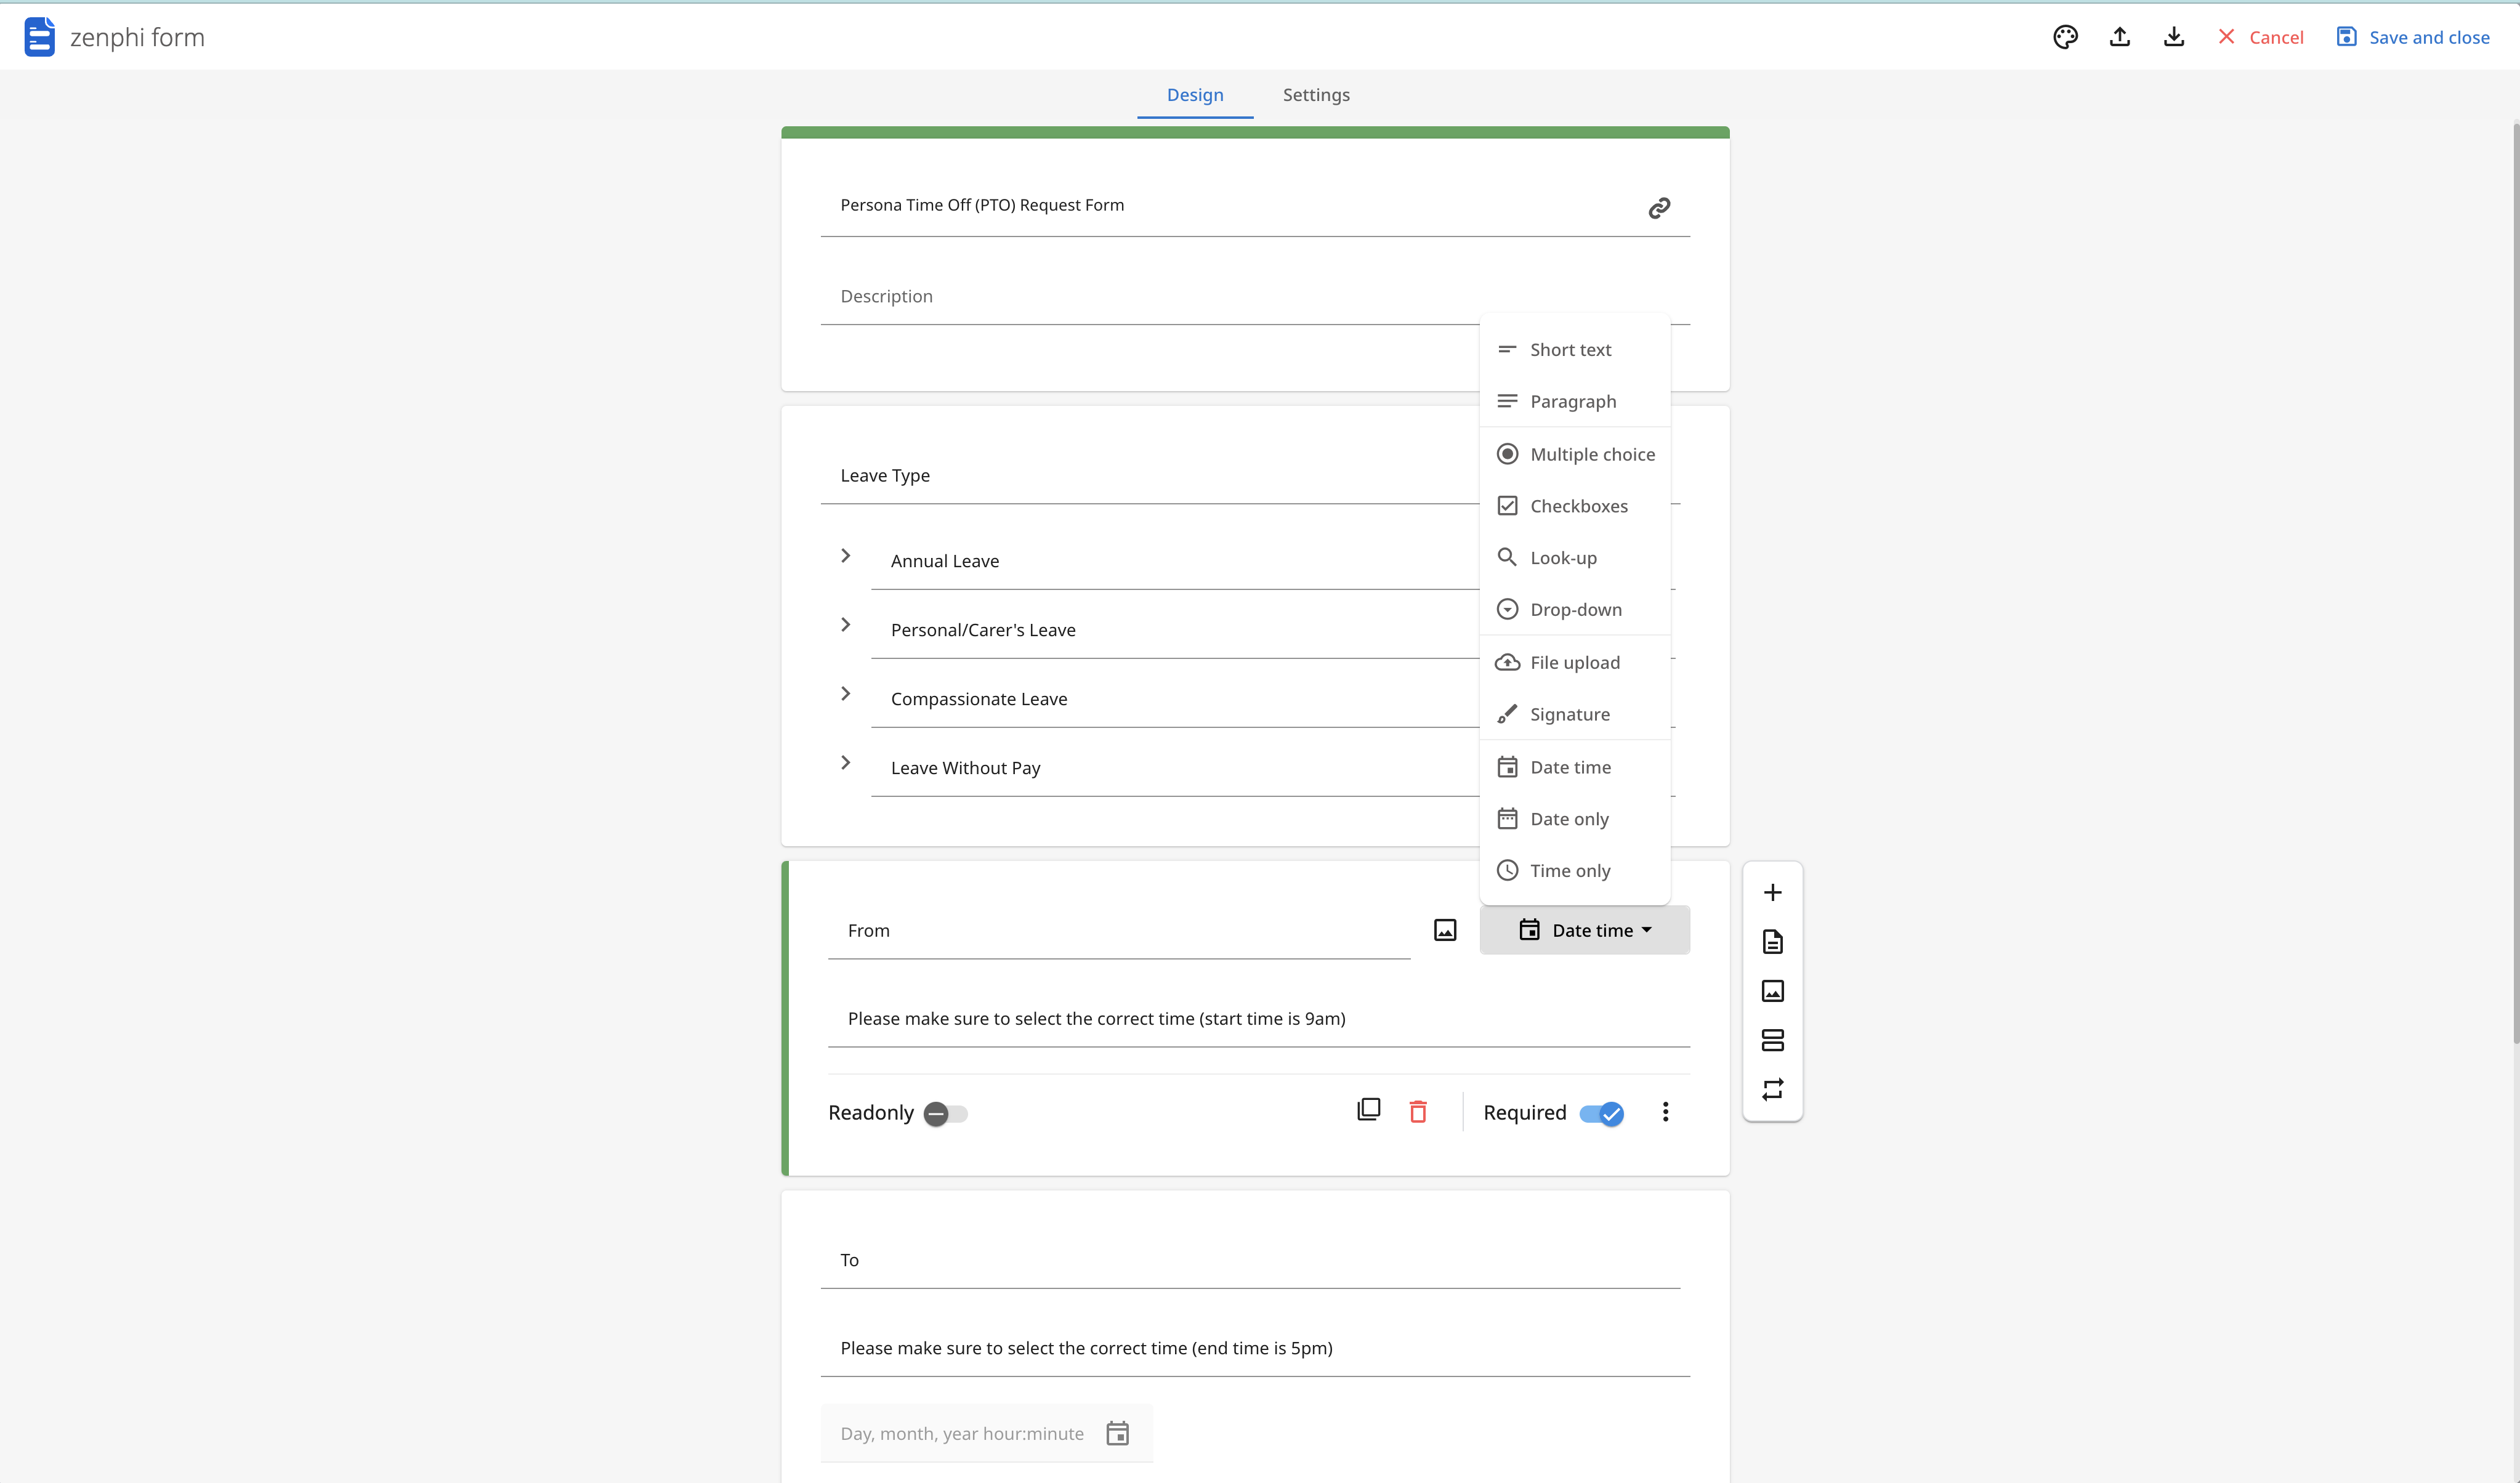 zenphi Software - Build & customize forms within zenphi. Zenphi Forms provide a powerful alternative to Google Forms for your data capture requ~ments. However, with seamless integration to Google Forms, Typeform and other applications, you're in control of every step.